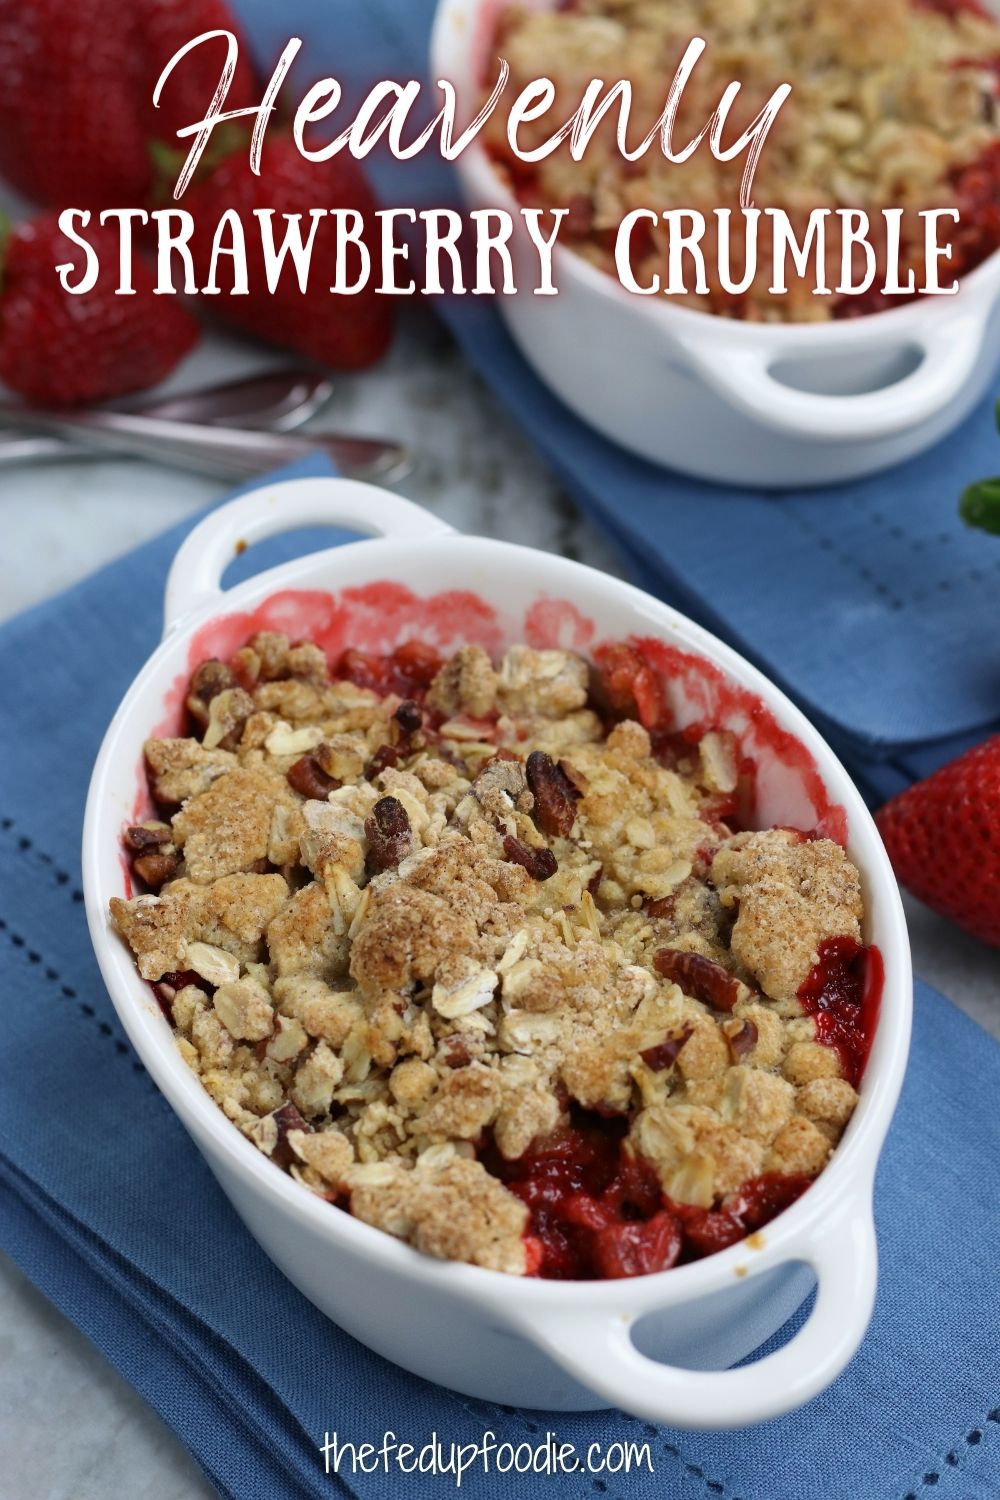 Using fresh or frozen berries, this Strawberry Crumble is a divine dessert with a buttery and crumbly oat pecan topping. This summertime classic is wonderful for parties, BBQ's or just as a treat because of its easy and quick assembly and heavenly flavor. 
#StrawberryCrumble #EasyStrawberryCrumble #StrawberryCrispRecipeCrumble #SummerDessert #SummerDessertWithFruit #SummerDessertWithBerries #SimpleStraw berryDessert